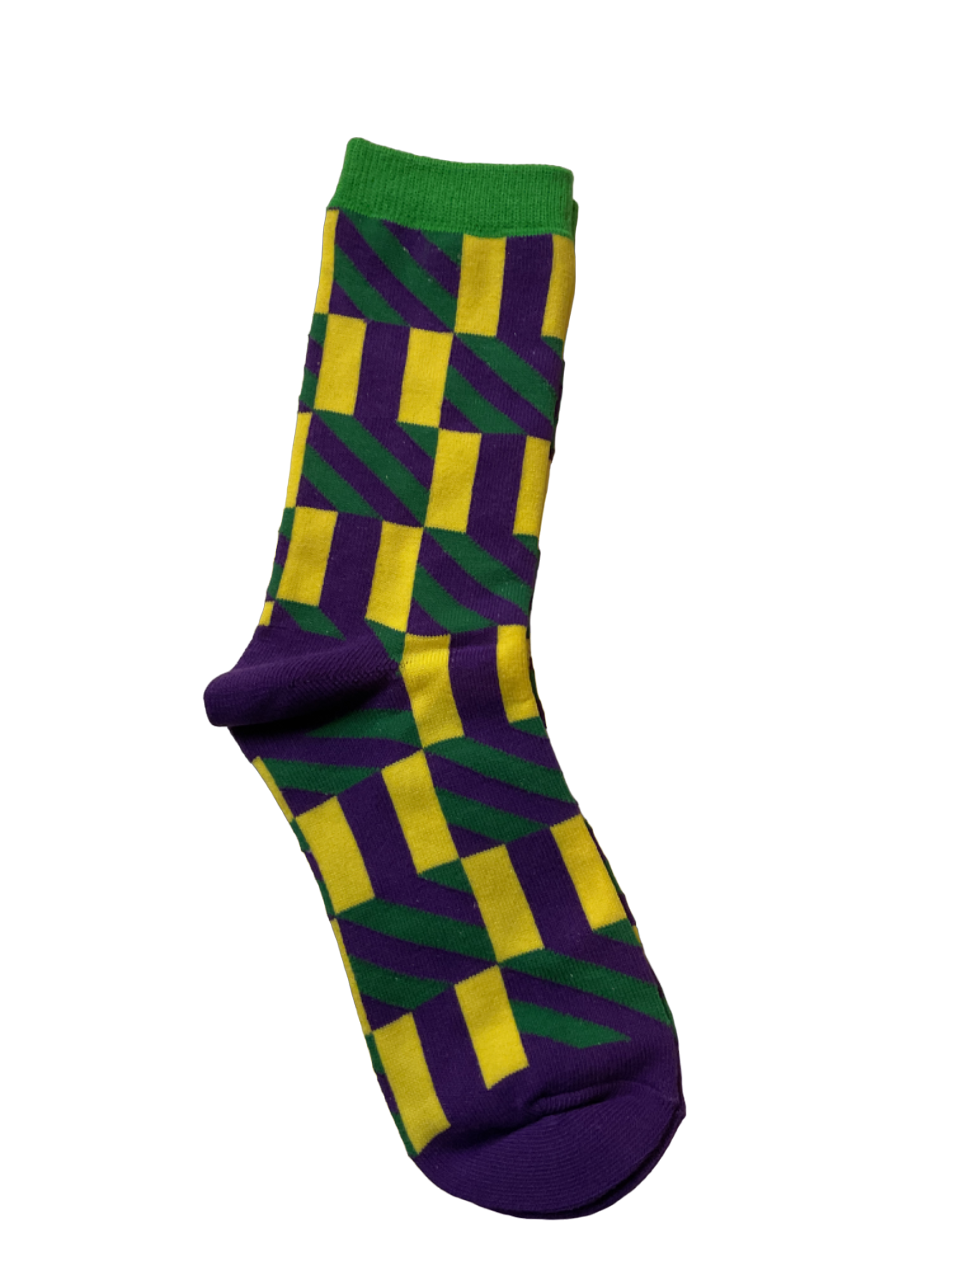 Purple, Green and Gold Square Socks